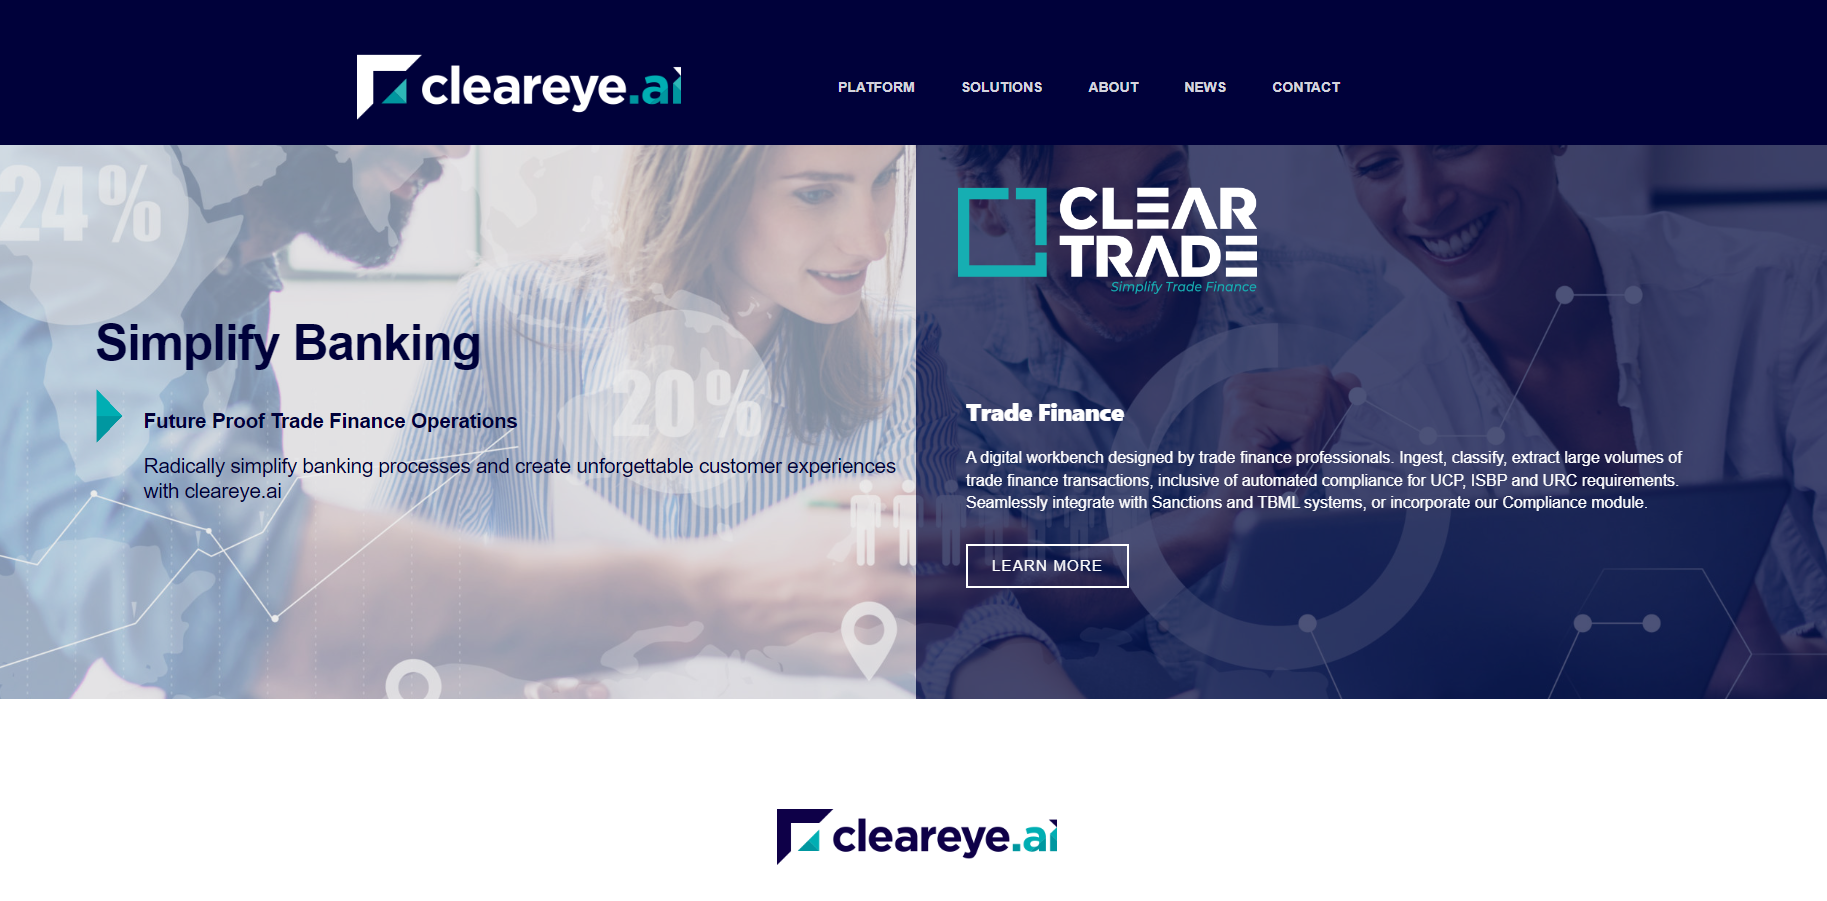 Cleareye.ai is revolutionizing the banking industry with its advanced Artificial Intelligence & Machine Learning platform